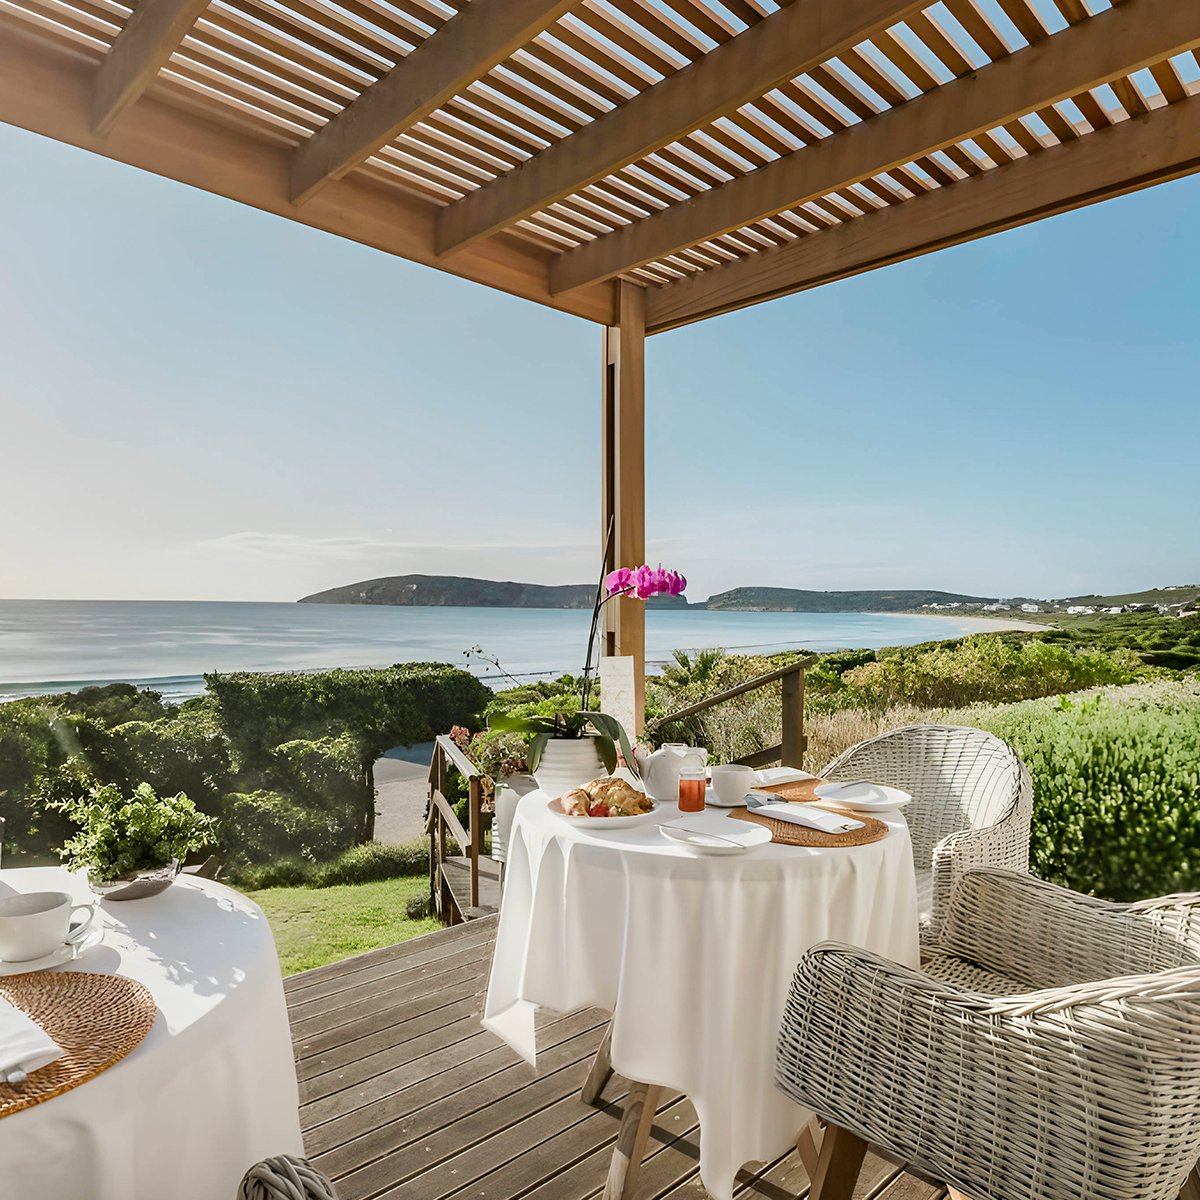 If you’re looking for a local gateway, then Plettenberg Bay is a must!

Check into the beach-front 5-star Robberg Beach Lodge for two nights from R1,156.00 pp!

View this, & other special packages online: bit.ly/3r5RXru

#LifestyleTravel #PlettenbergBay #LocalGetaway